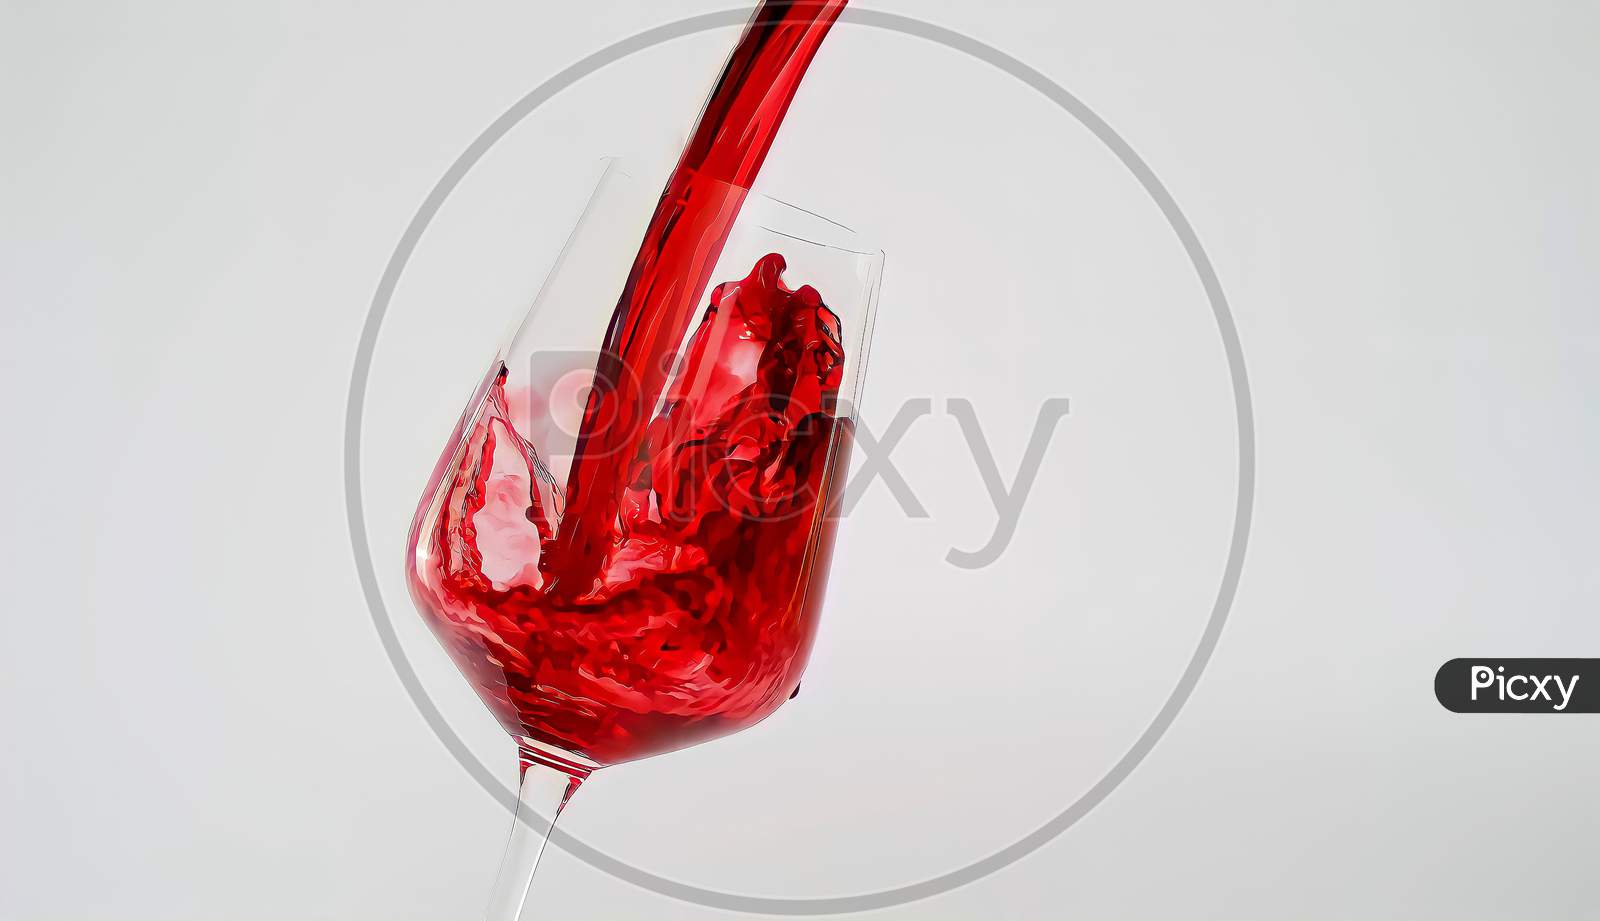 Red wine is pouring into a glass goblet on a white background. alcoholic drinks.